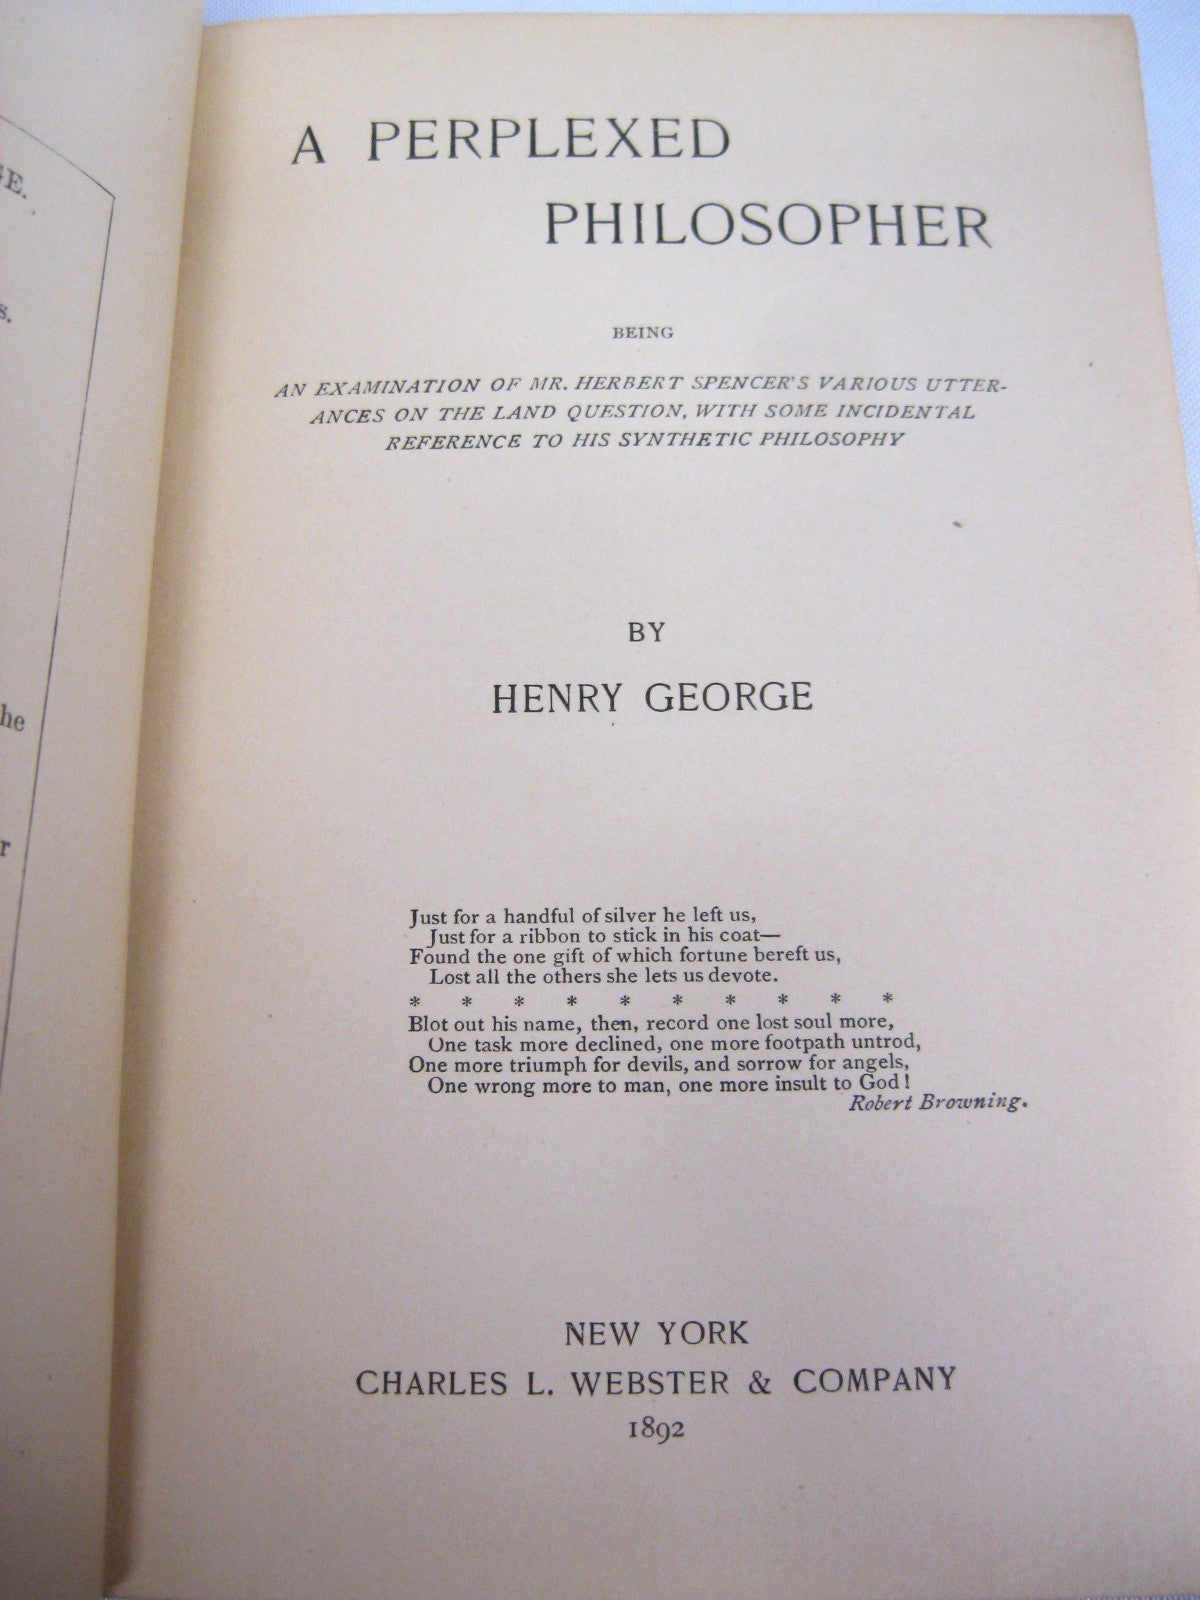 A Perplexed Philosopher by Henry George